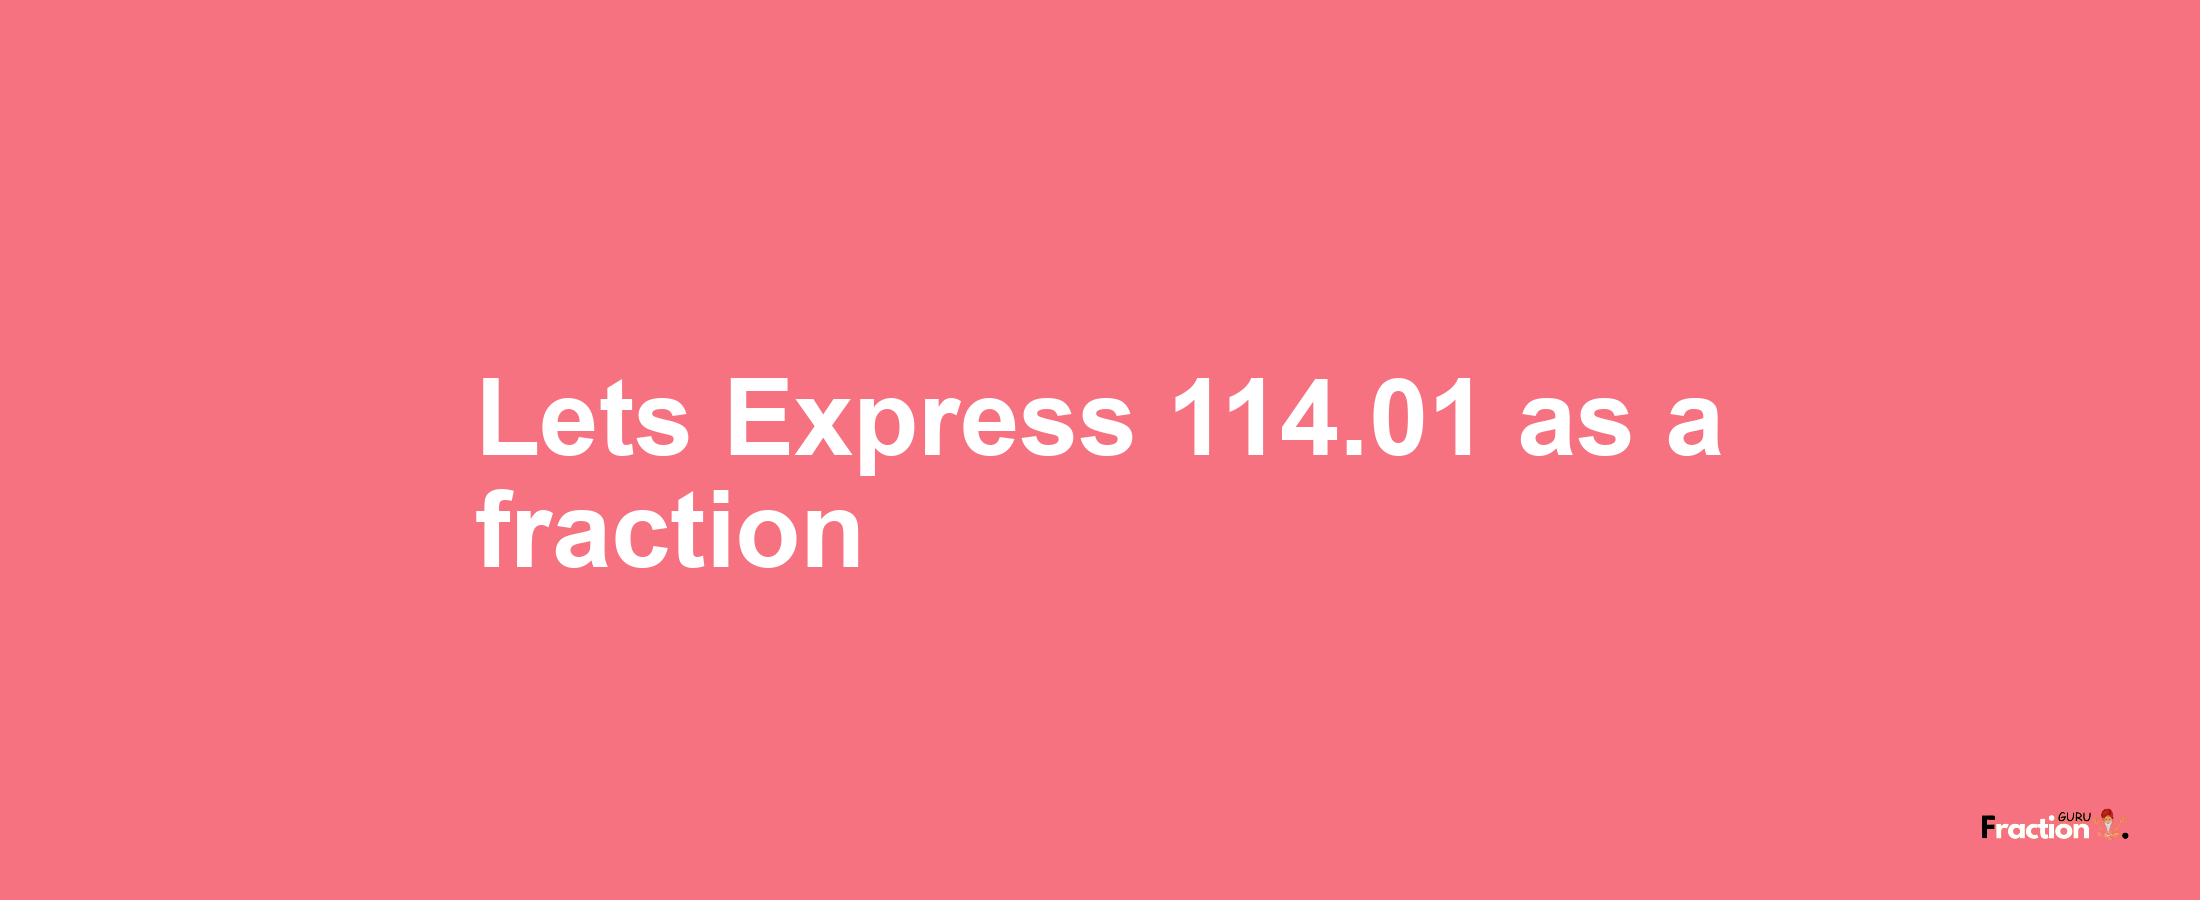 Lets Express 114.01 as afraction